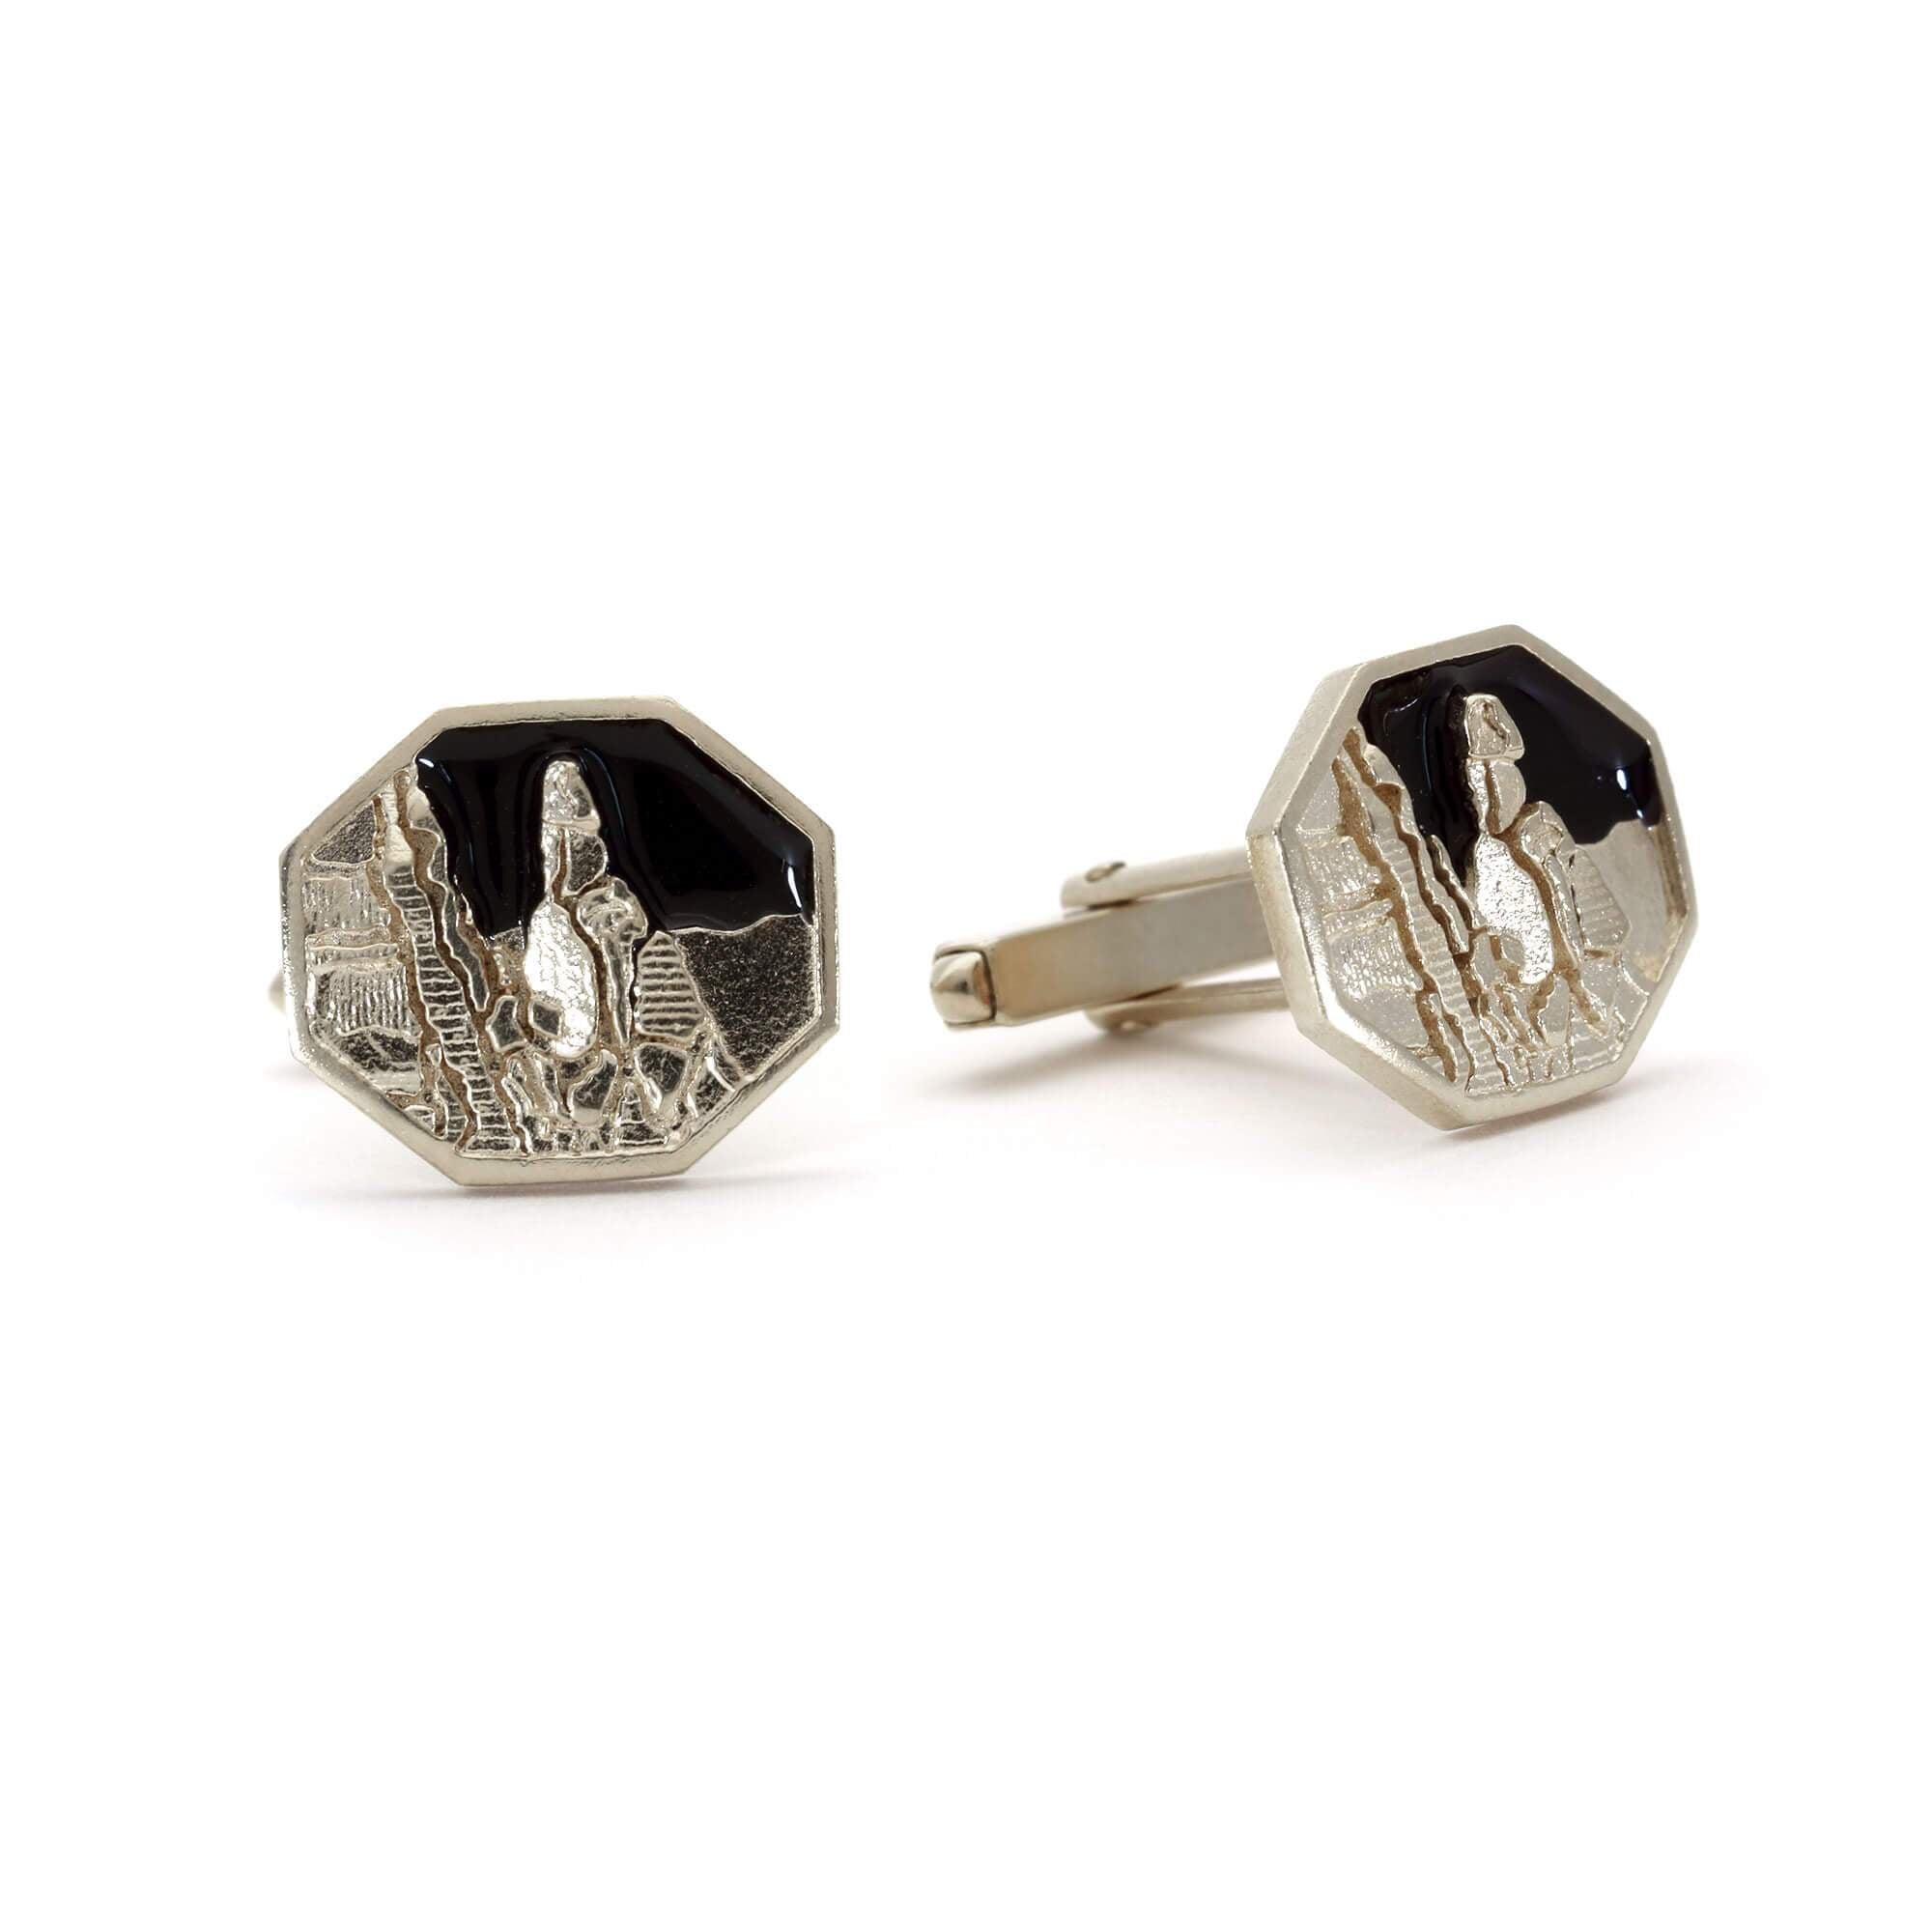 A pair of sterling silver and enamel cufflinks picturing Napes Needle